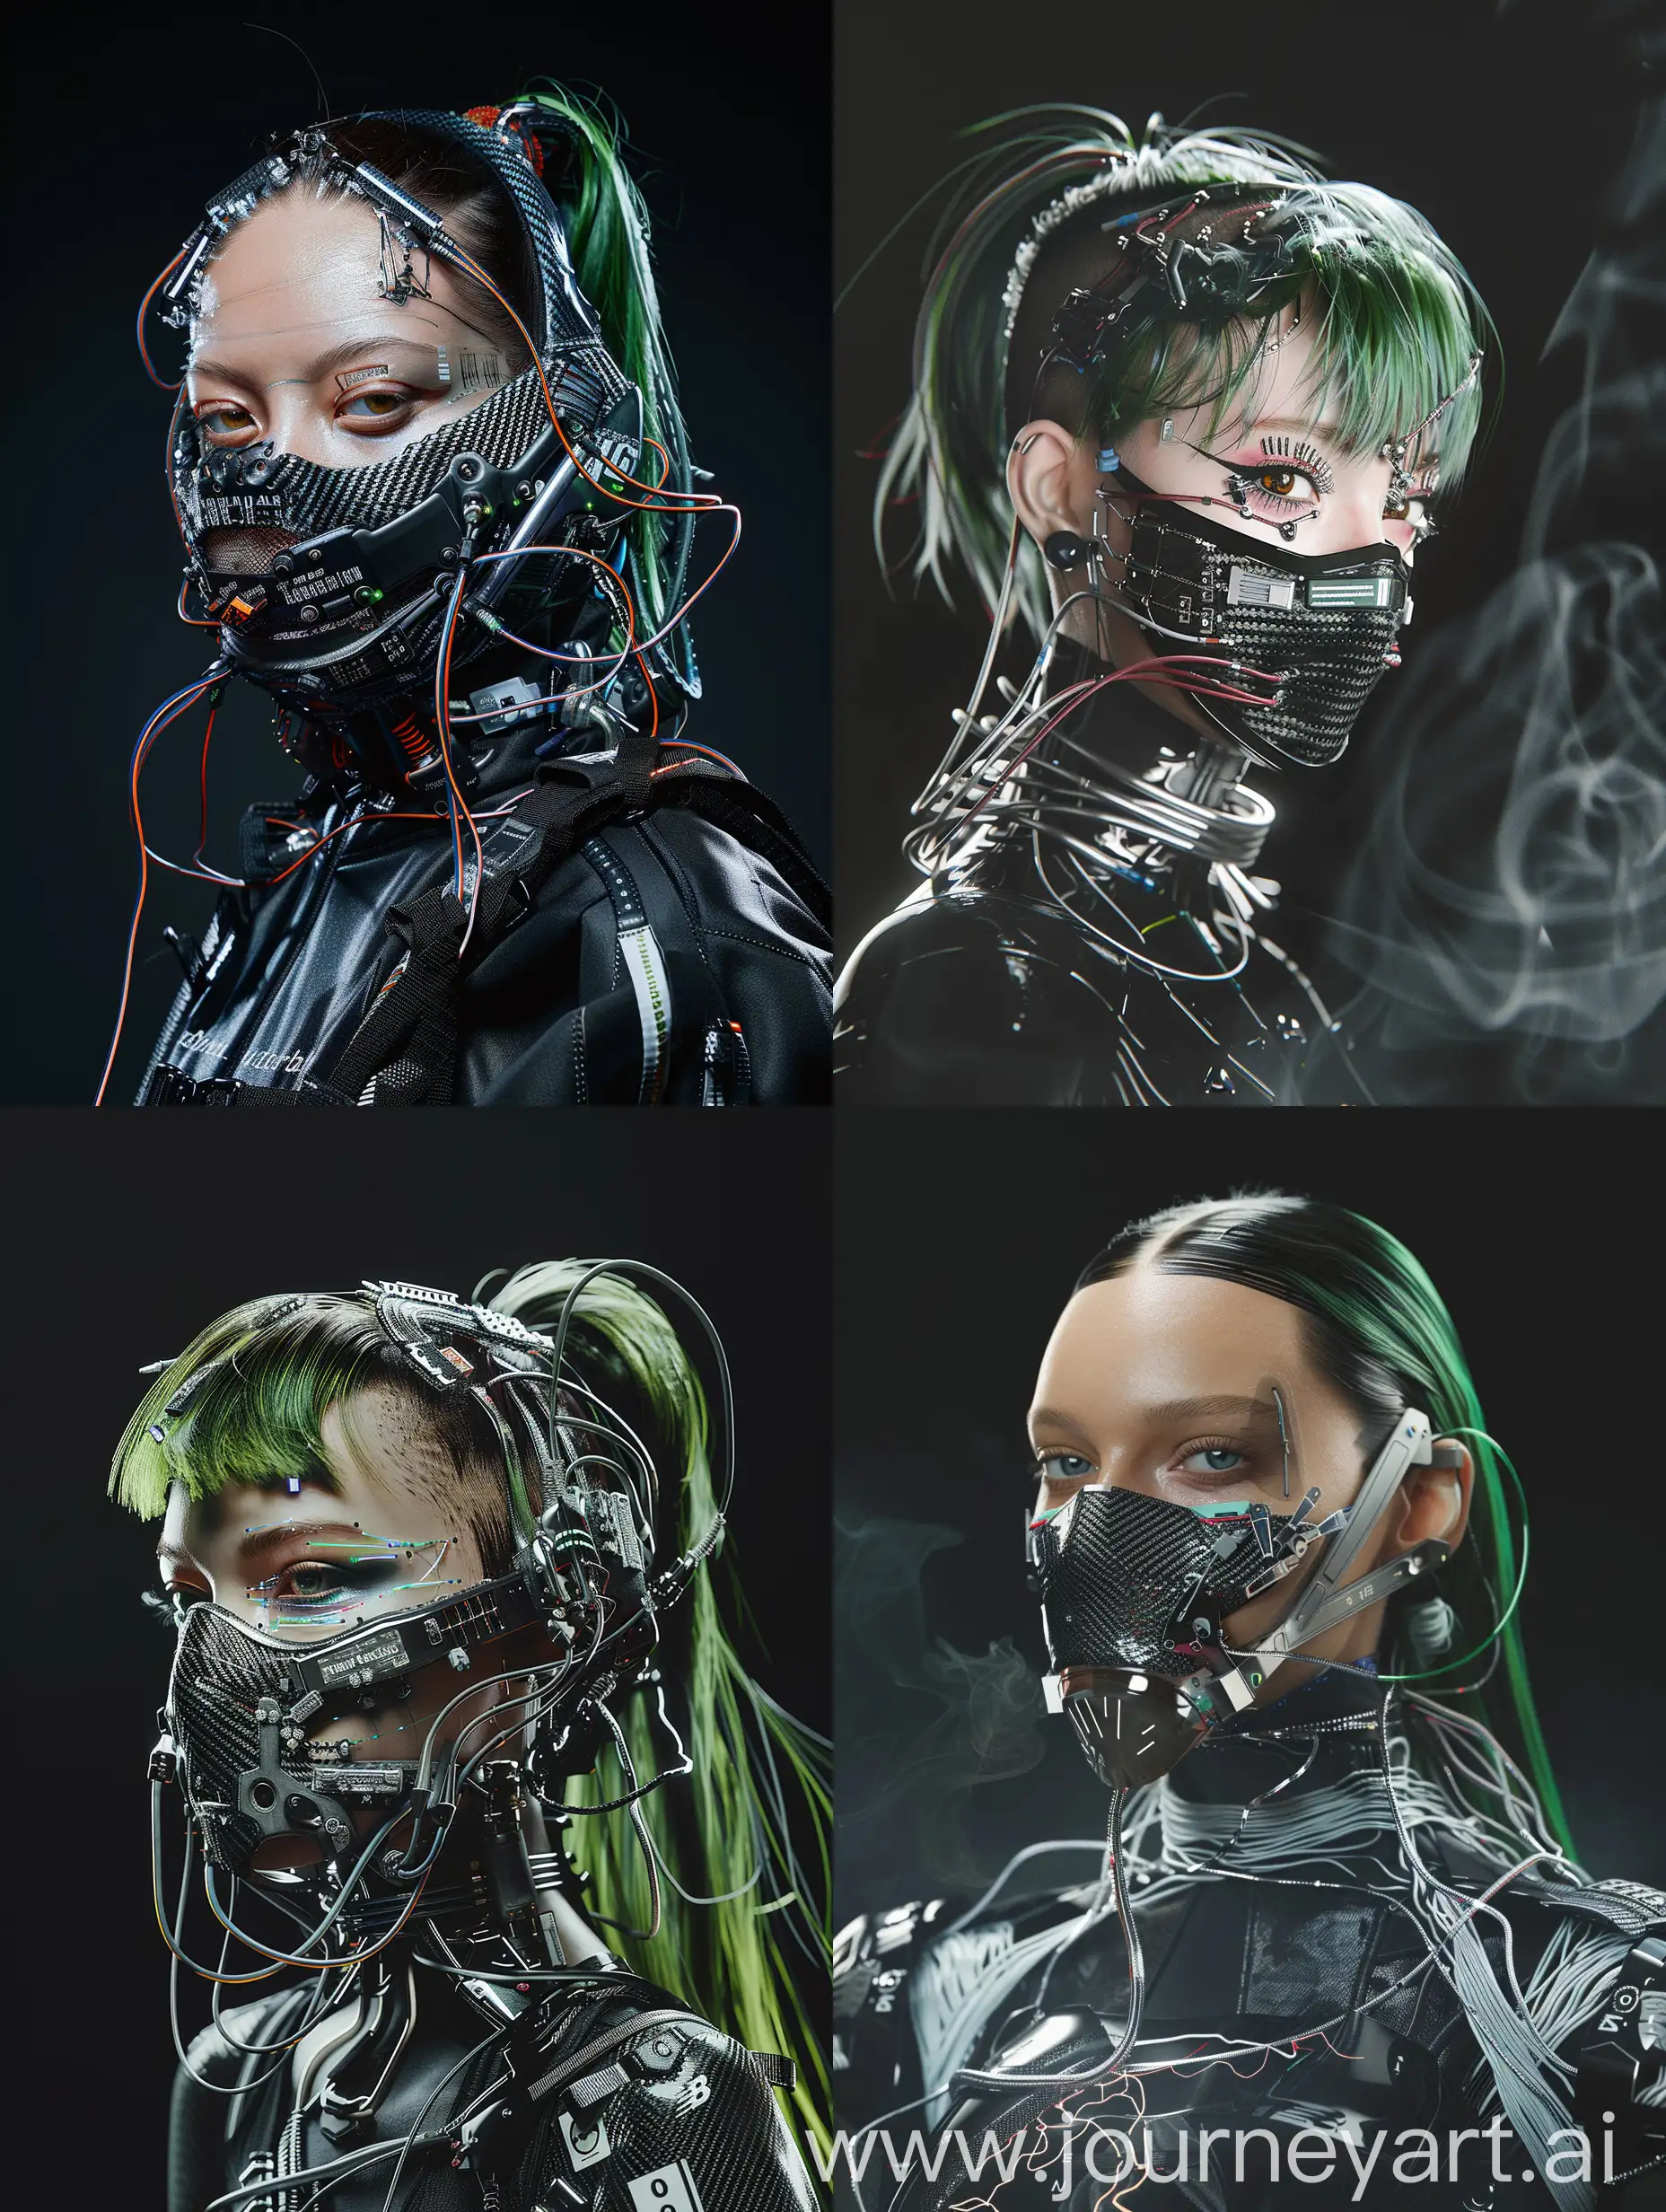 Against a sleek black backdrop, witness the captivating presence of a Beautiful characther, Green hair adorned with a cybernetic mouth-covering mask. It seamlessly merges cutting-edge technology with intricate details, showcasing carbon fiber textures, sleek aluminum accents, and pulsating wires. Symbolizing the delicate equilibrium between humanity and machine, her appearance embodies the essence of a futuristic cyberpunk aesthetic, further accentuated by New Balance-inspired add-ons. With dynamic movements reminiscent of action-packed film sequences, accompanied by cinematic haze and an electric energy, she exudes an irresistible allure that commands attention